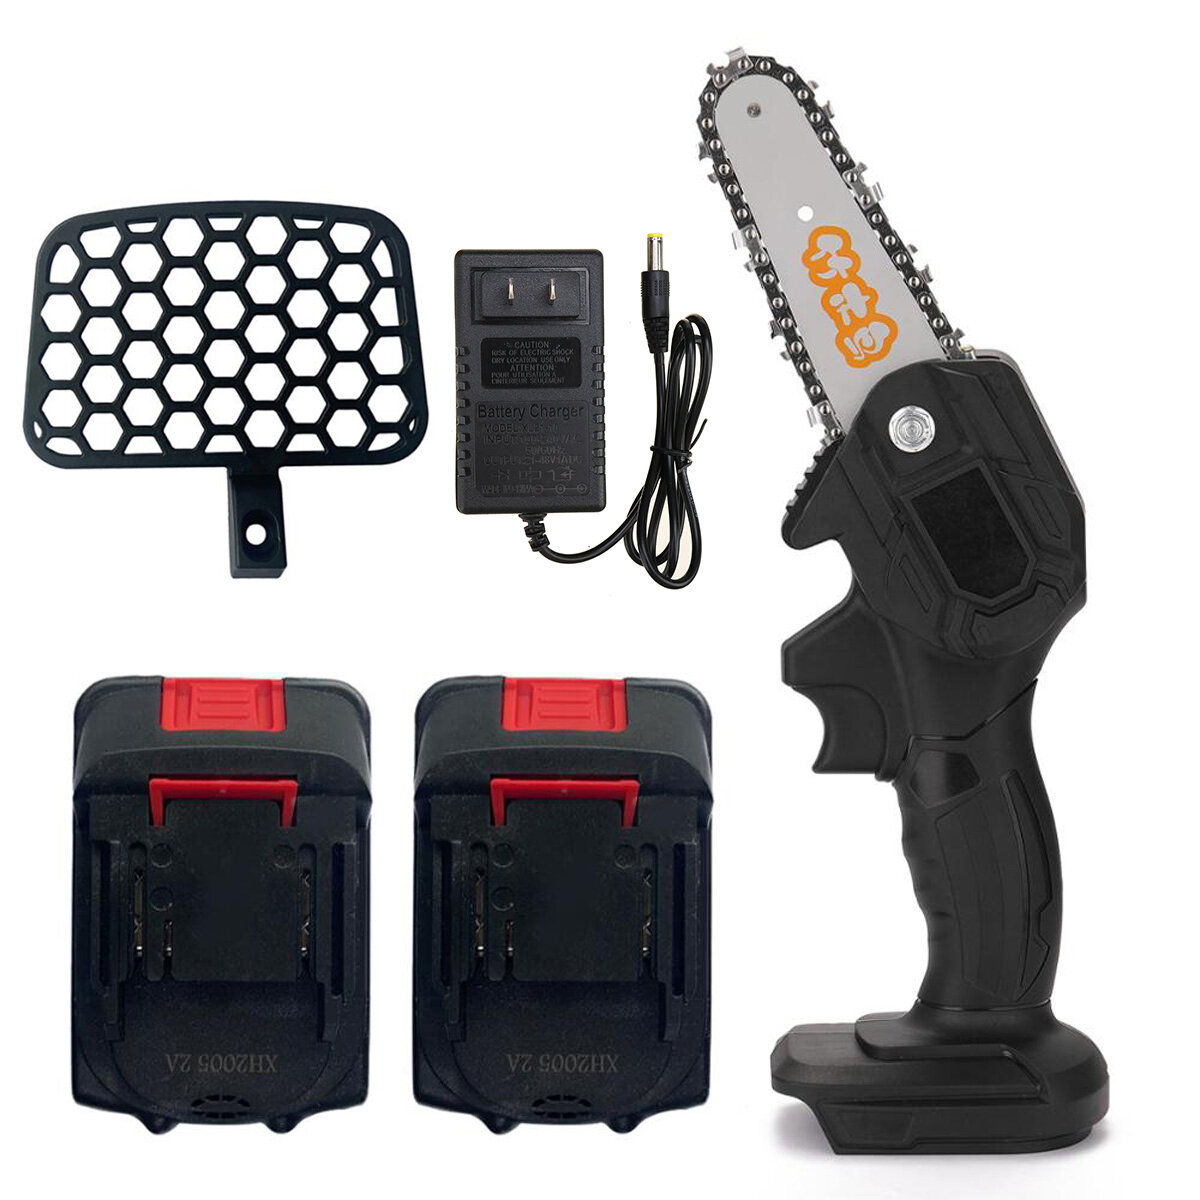 Image of 24V Cordless Electric Chainsaw 4 Inch Portable Chain Saw Woodworking Cutting Tool W/ 2pcs Battery